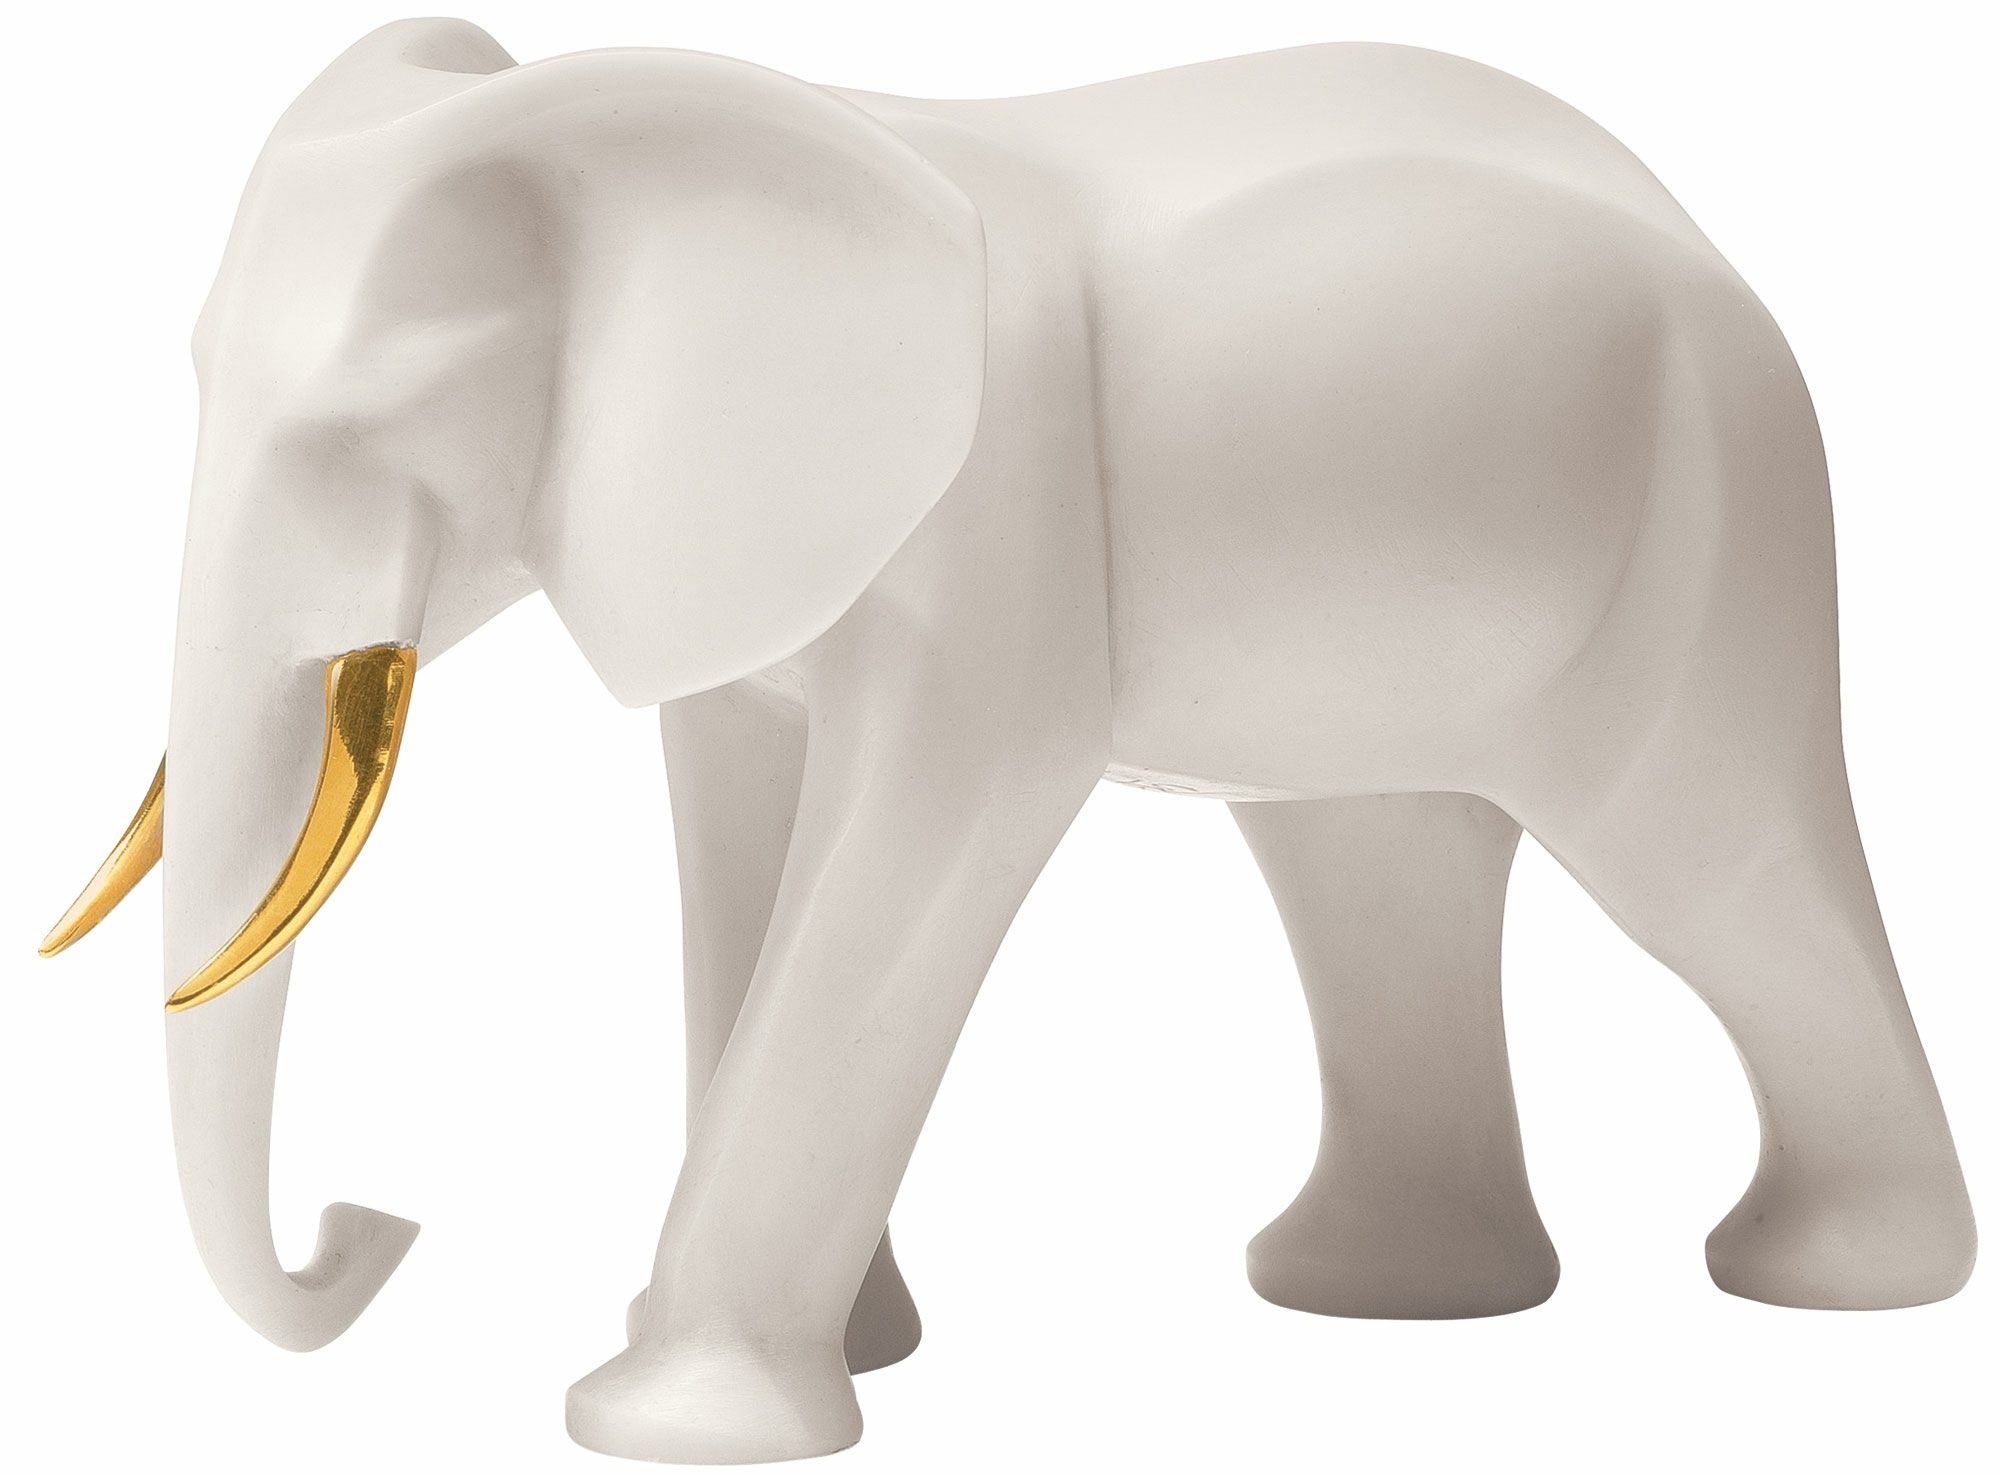 Sculpture "Elephant", artificial marble version by SIME